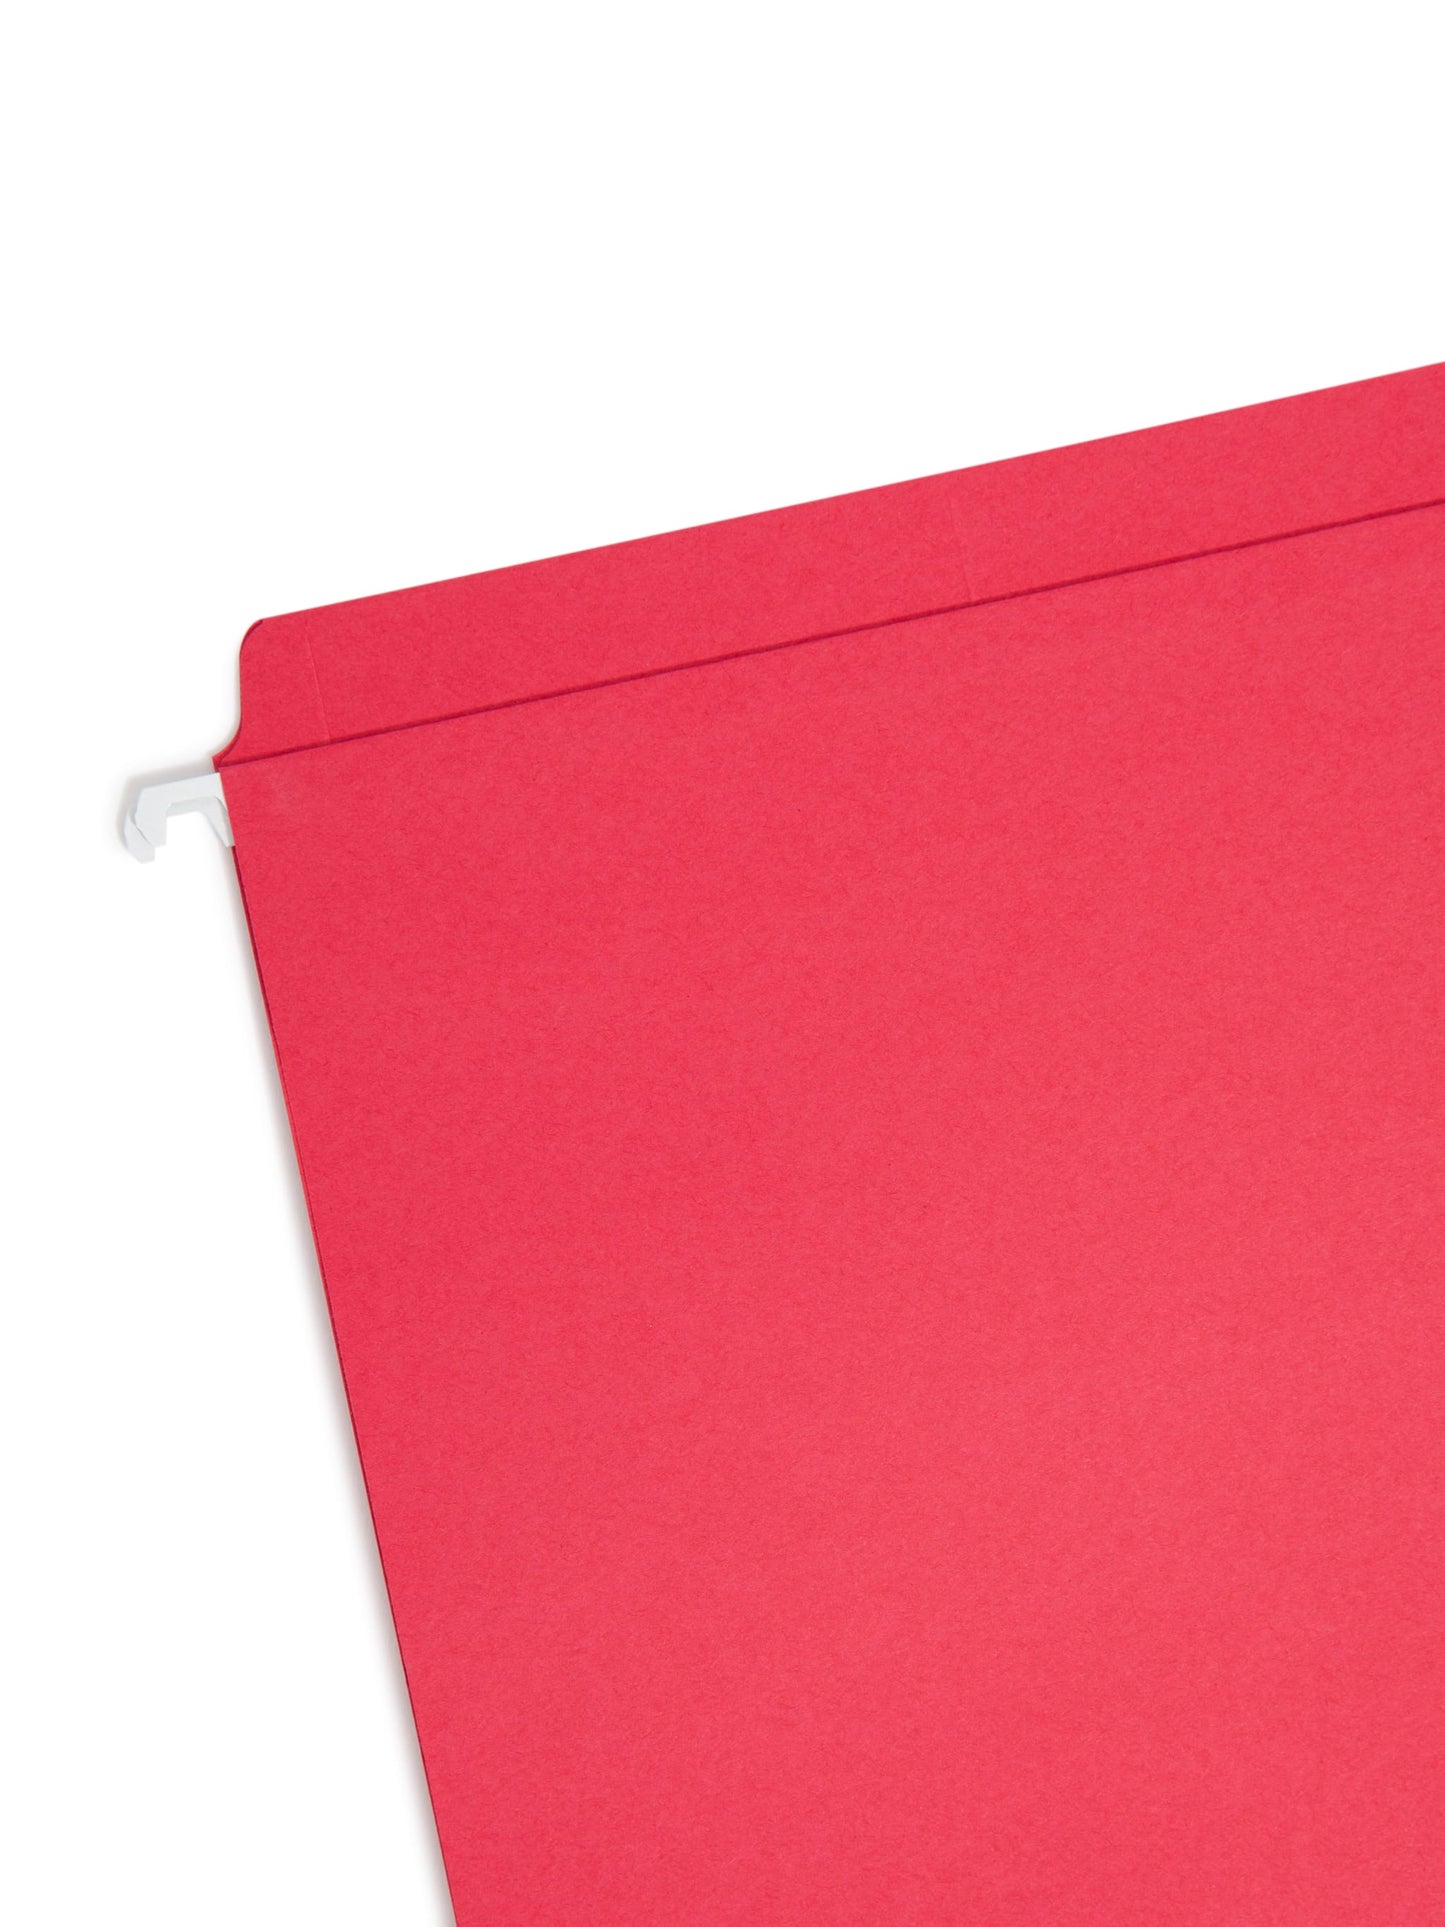 FasTab® Hanging File Folders, Straight-Cut Tab, Assorted Colors Color, Letter Size, Set of 18, 086486641005